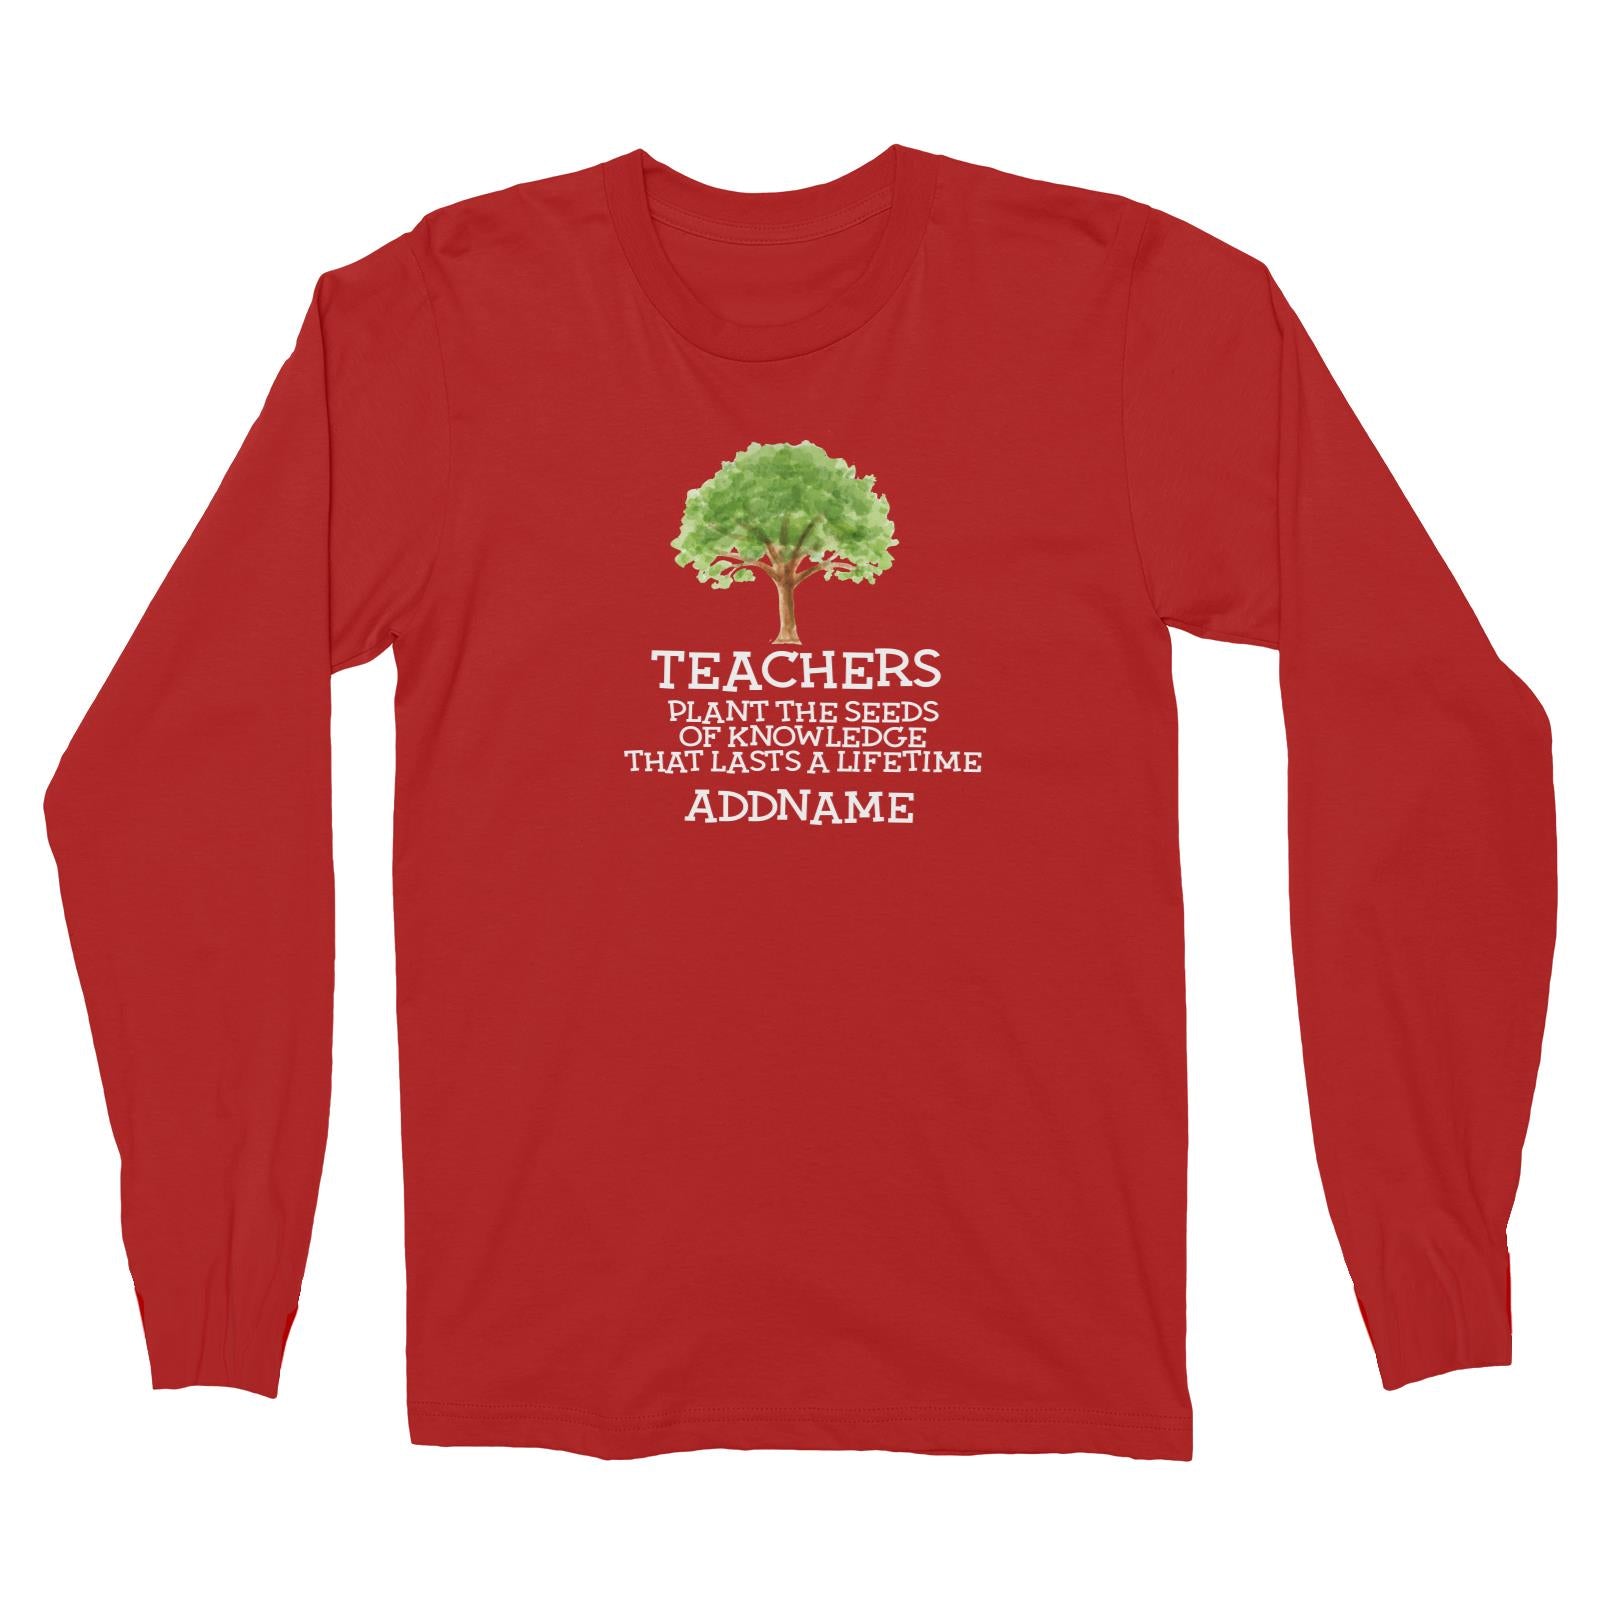 Teacher Quotes 2 Teachers Plant The Seeds Of Knowledge That Lasts A Lifetime Addname Long Sleeve Unisex T-Shirt